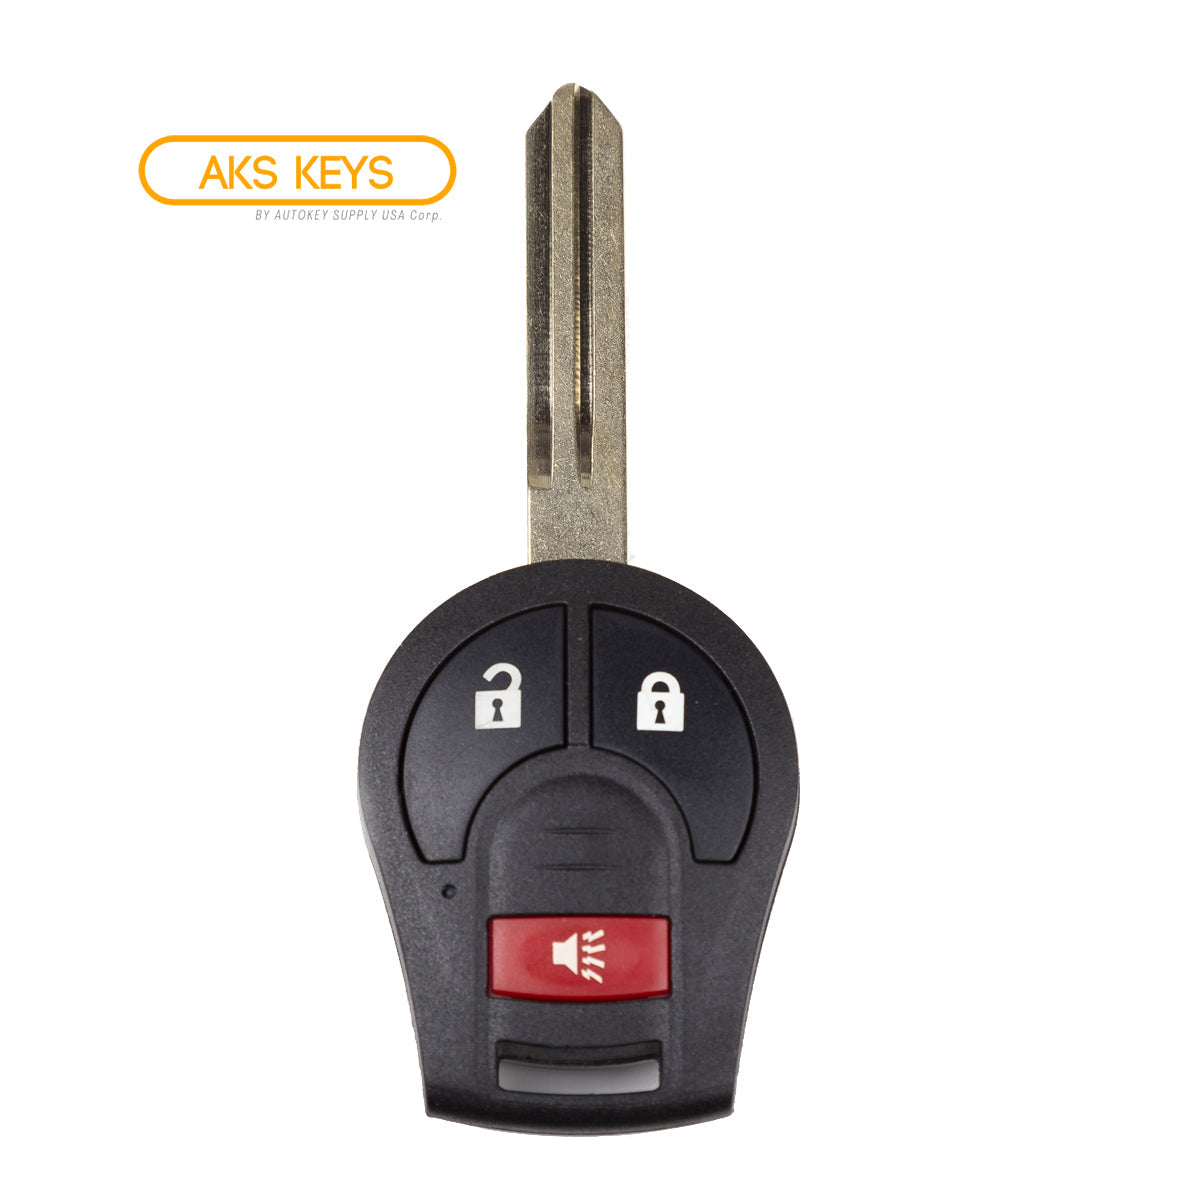 2016 Nissan NV200 Key Fob Replacement - Aftermarket - 3 Buttons Fob FCC# CWTWB1U751